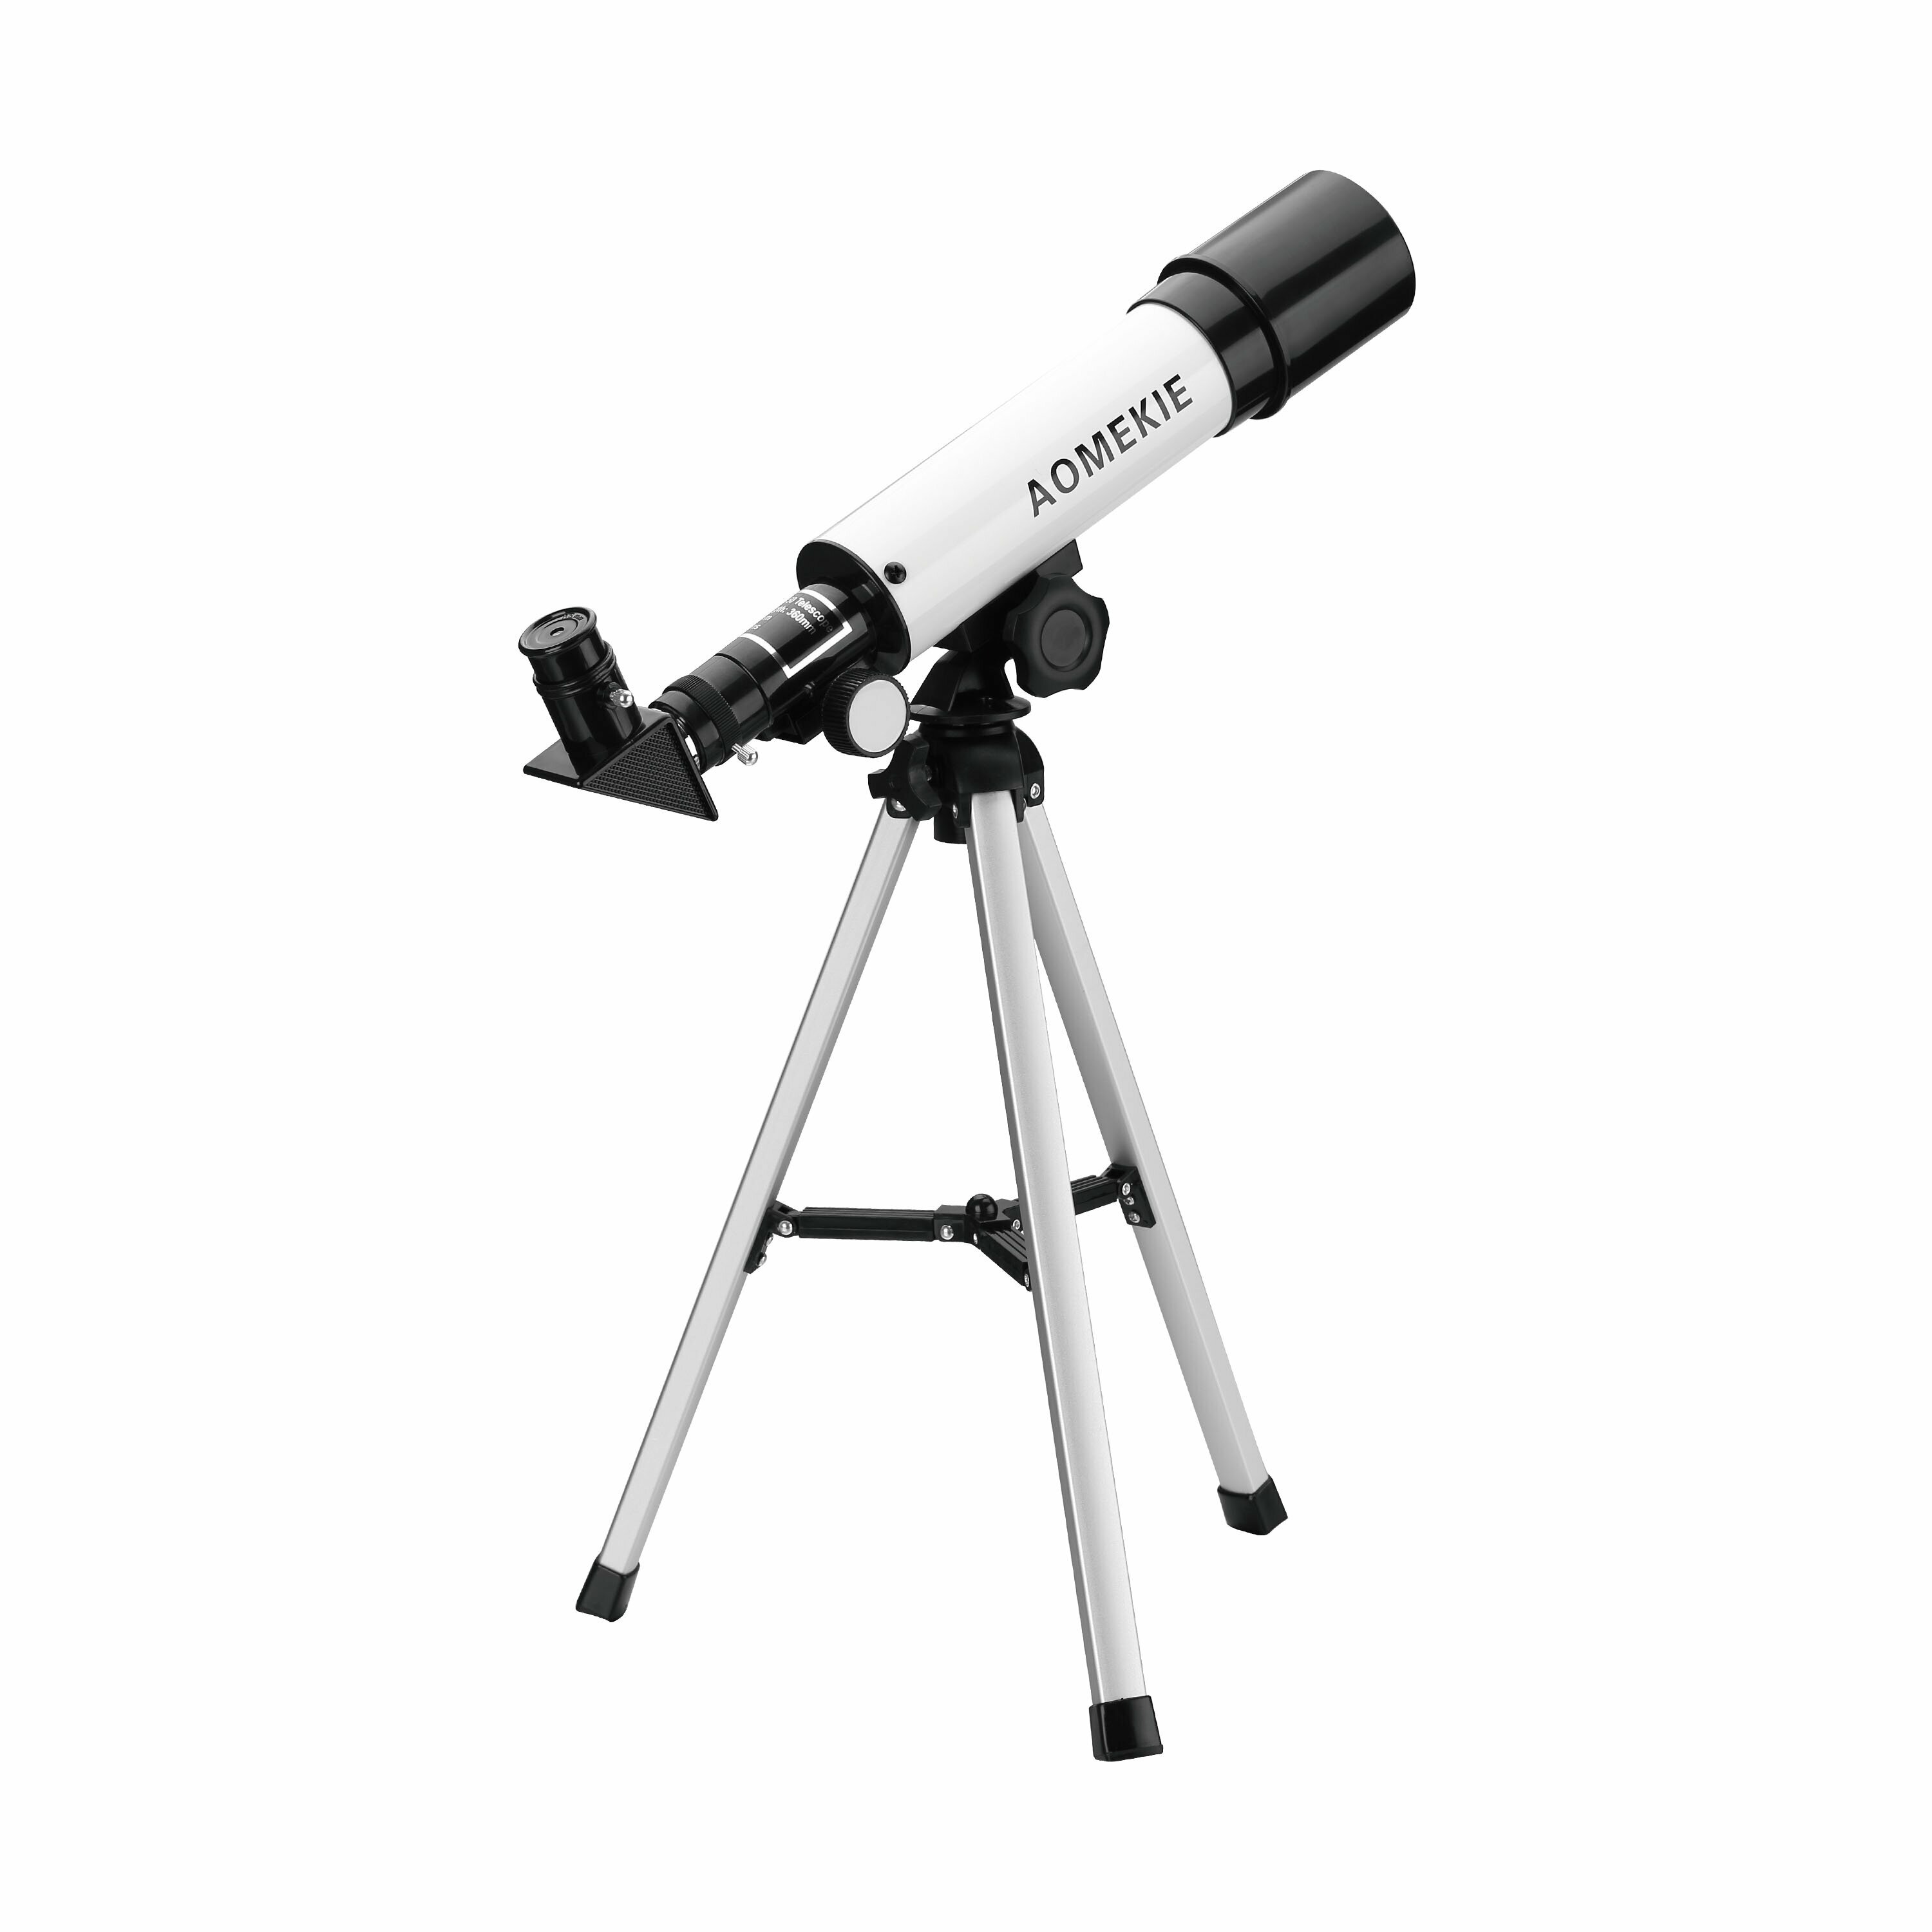 [EU Direct] AOMEKIE Astronomical Telescope for Kids 50/360mm Telescope for Astronomy Beginners with Carrying Case Tripod Erecting Eyepiece Refractor Telescope AO2008